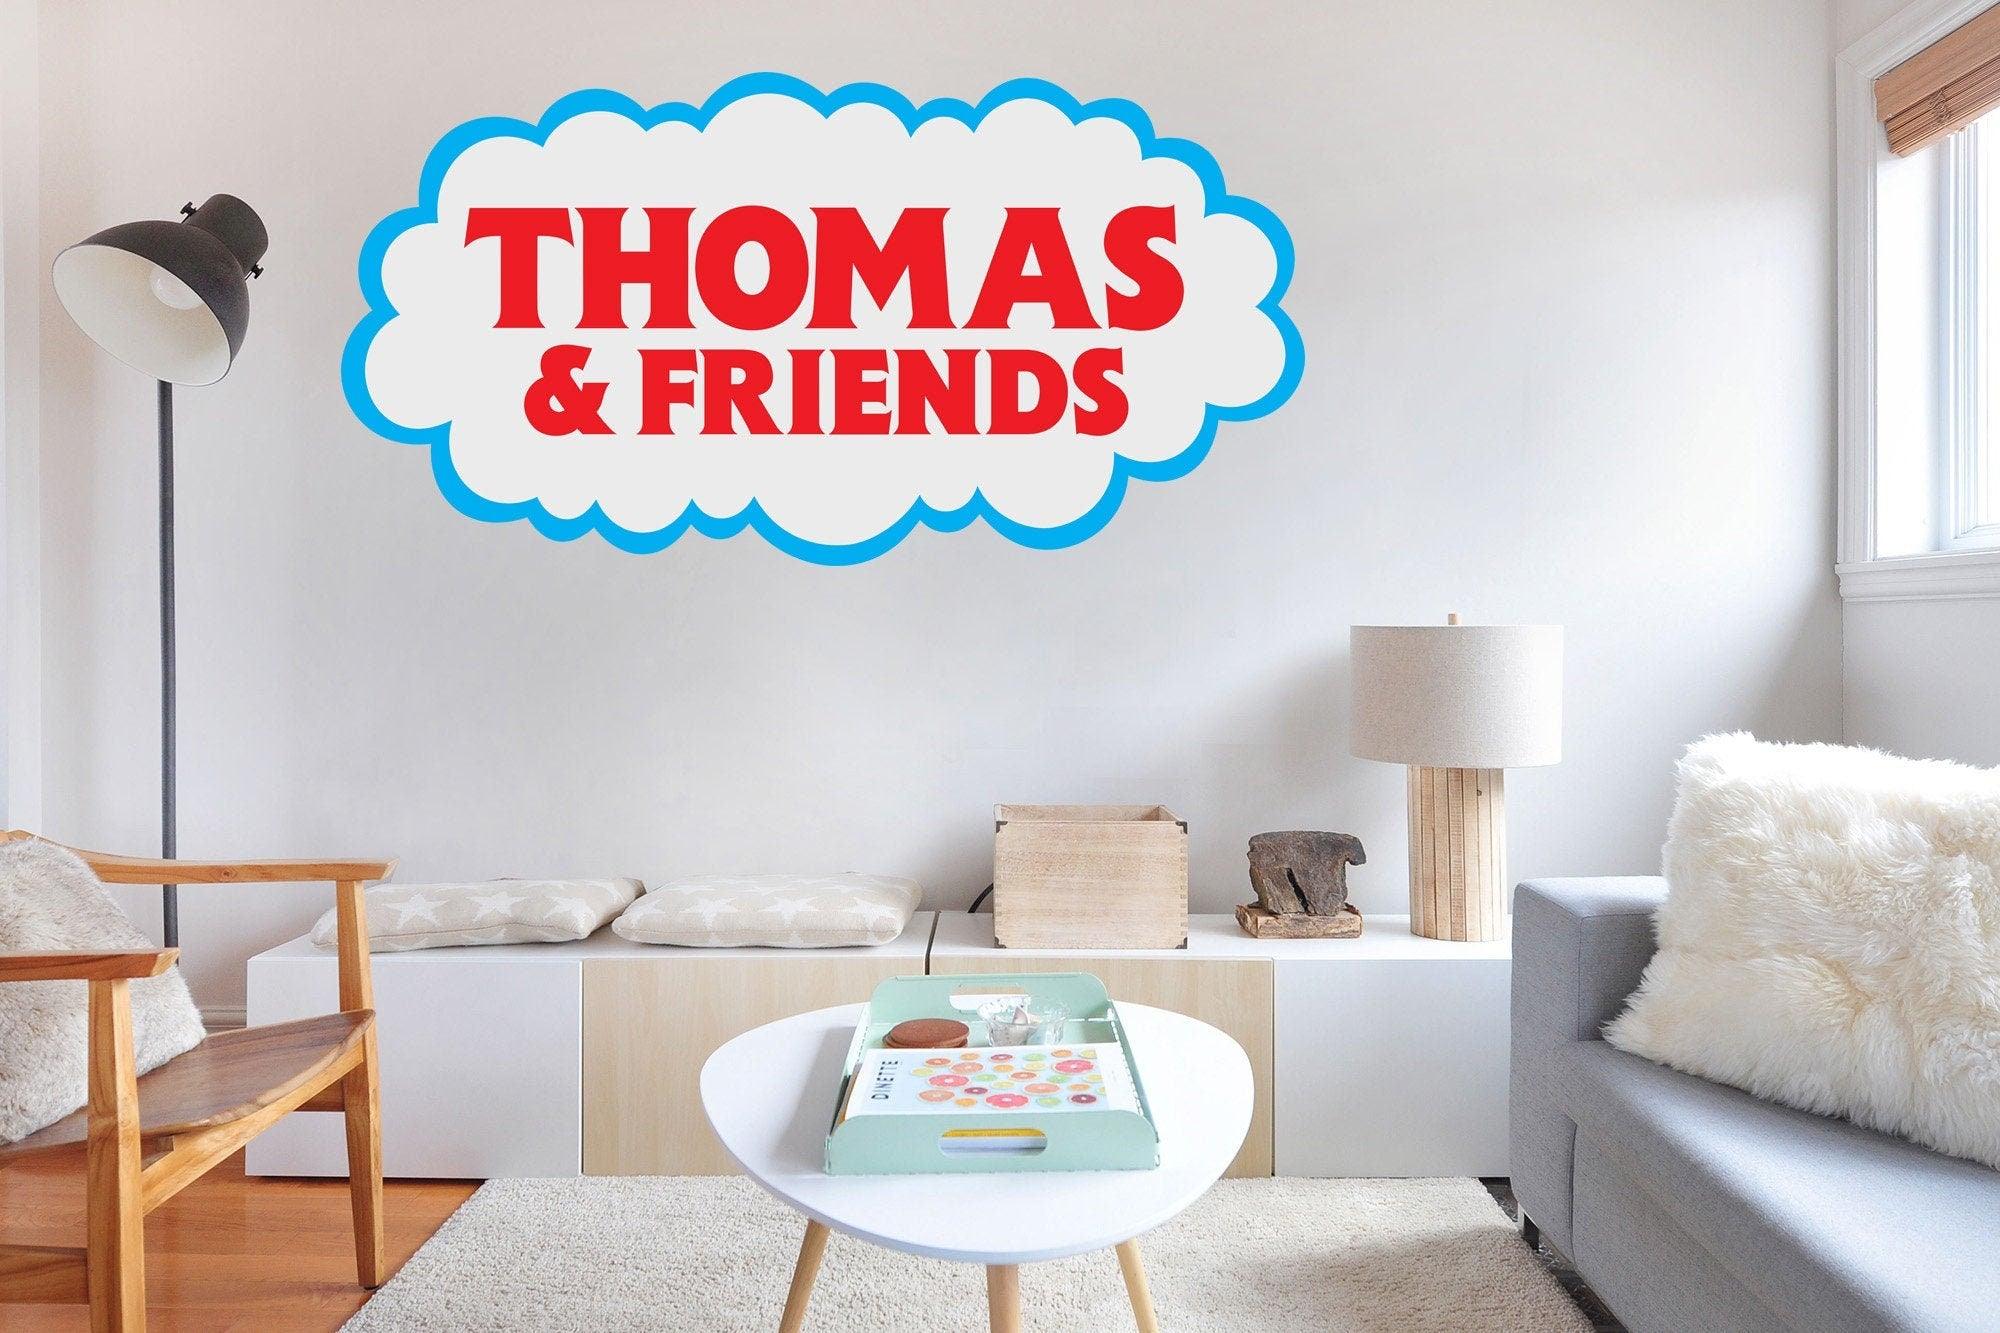 Thomas and Friends Decal for Kids Room, Soft Fabric Decal, Peel-N-Stick Decal, Removable Anytime